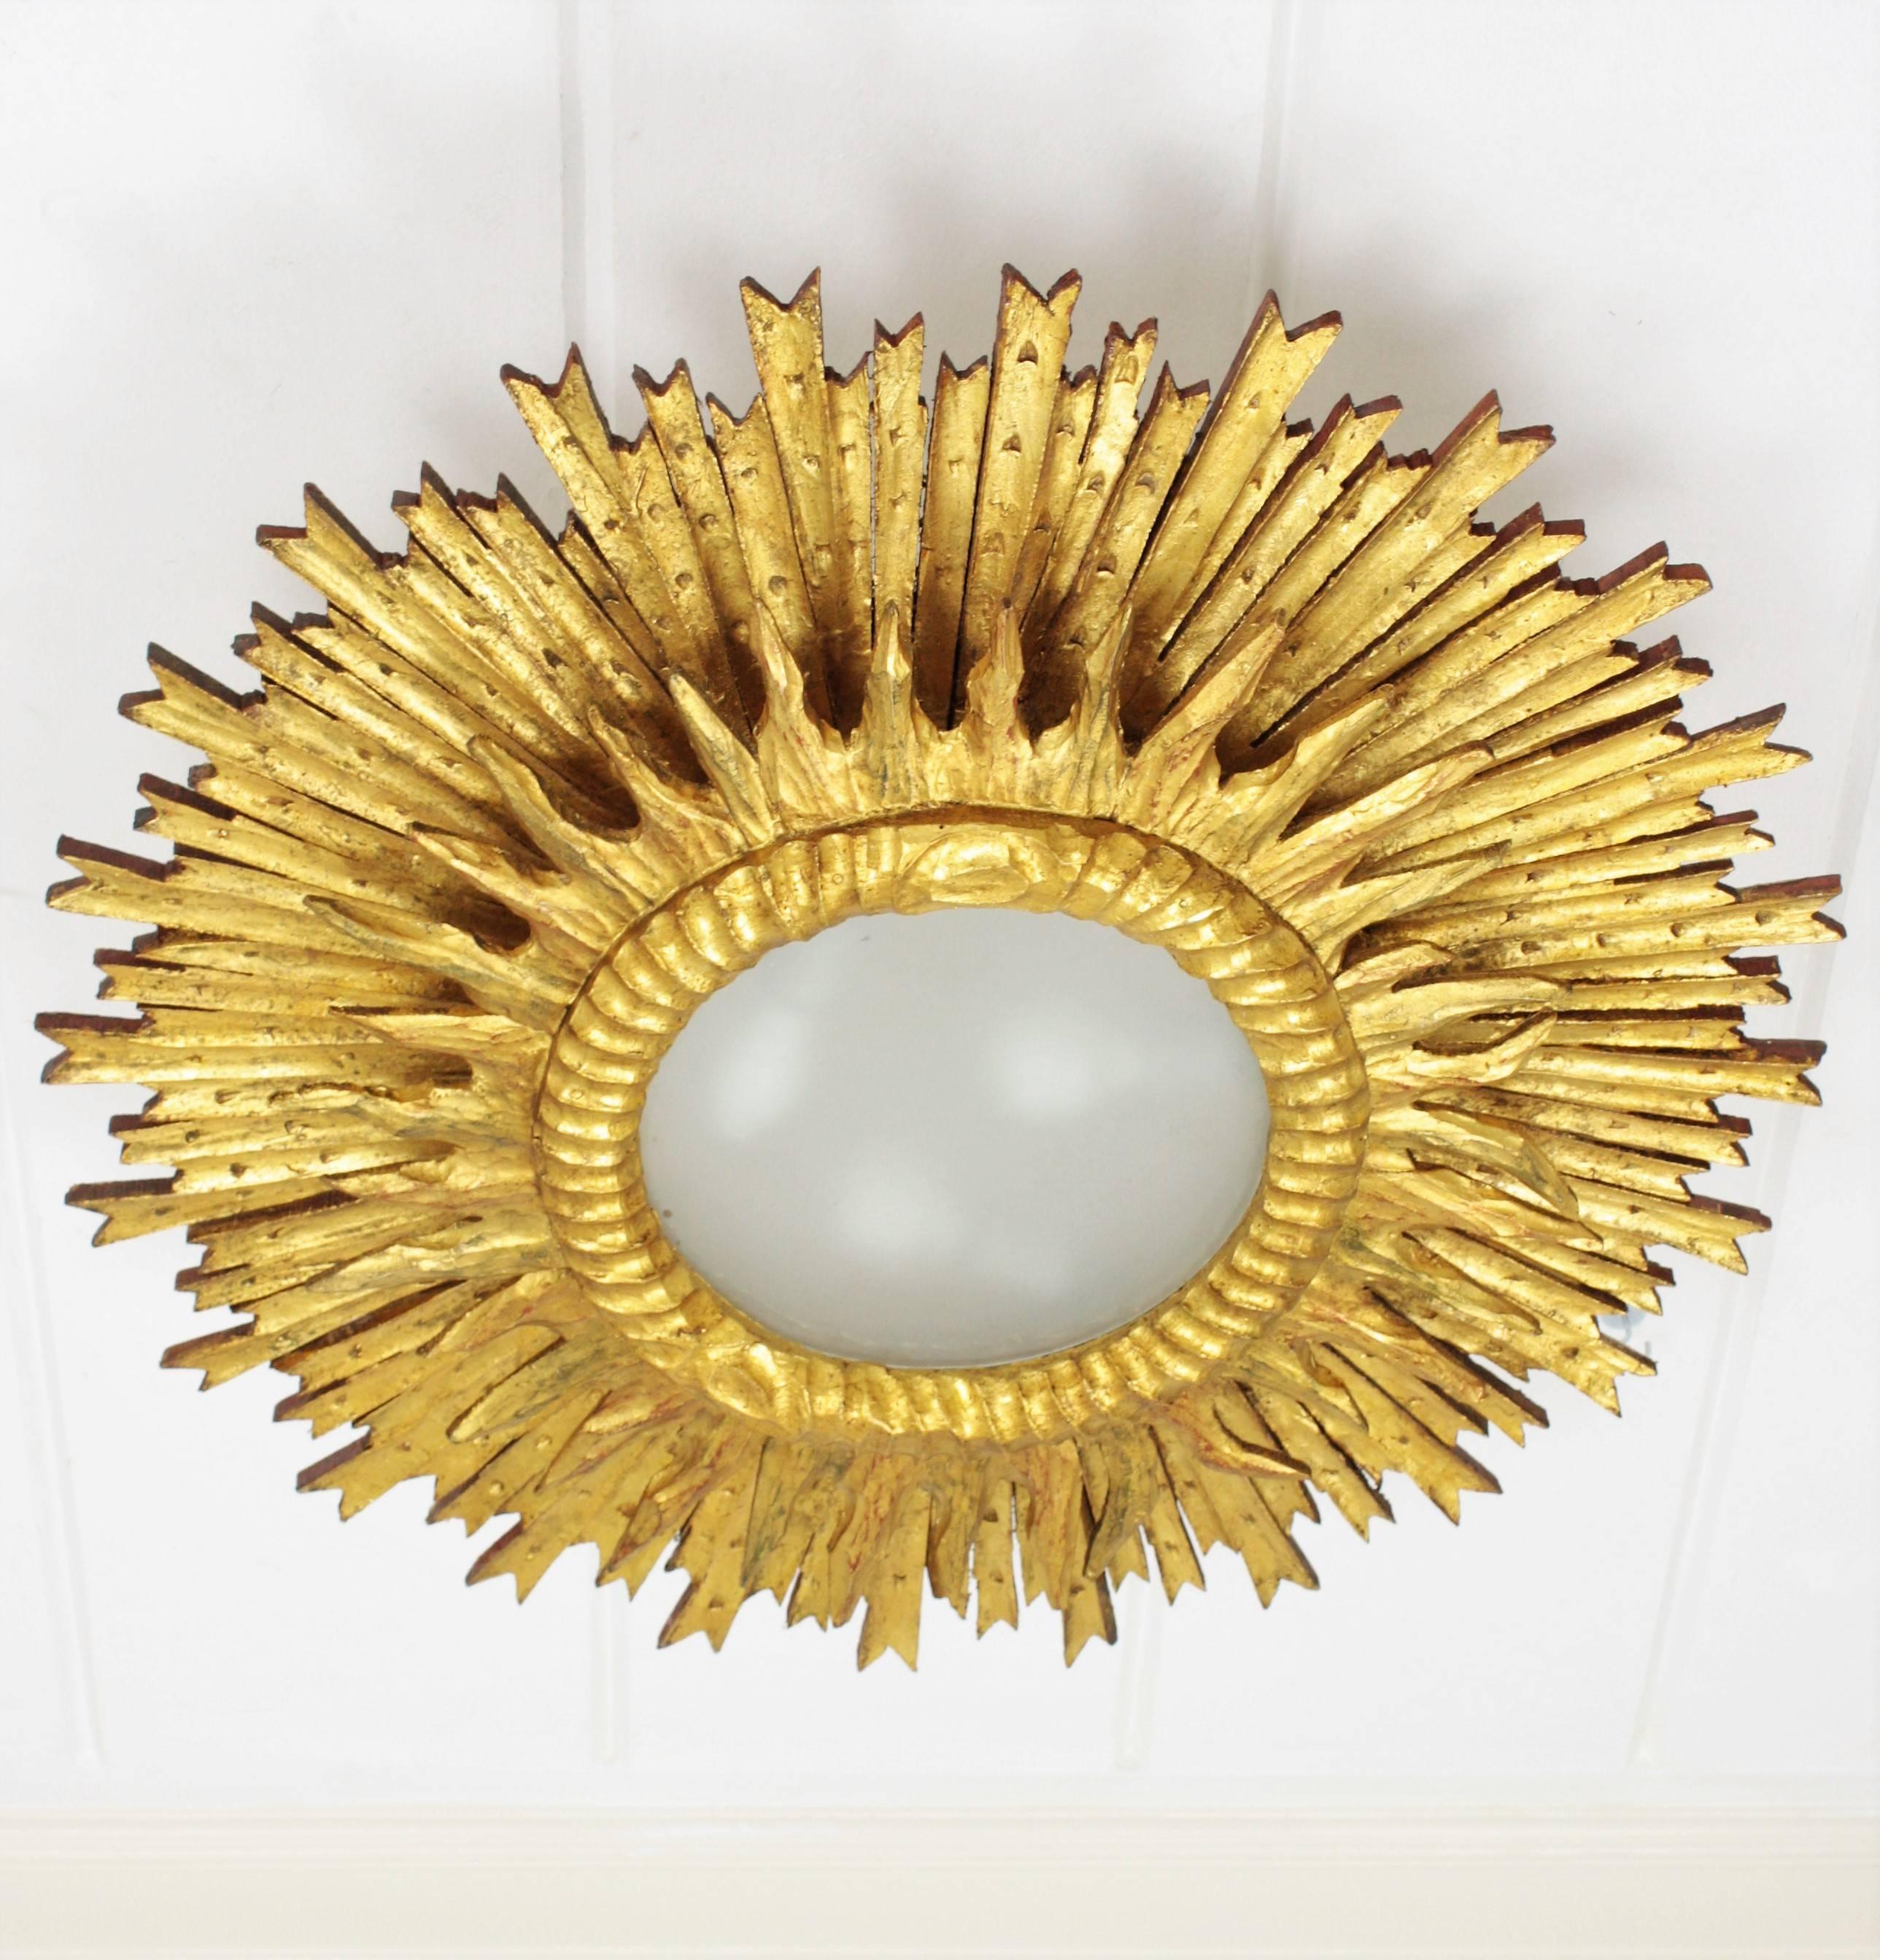 A huge double layered carved and giltwood sunburst light fixture with gold leaf finish. This absolutely stunning sunburst light fixture has a frame with large beams and a small frame with short beams surrounding the central frosted glass difusser.